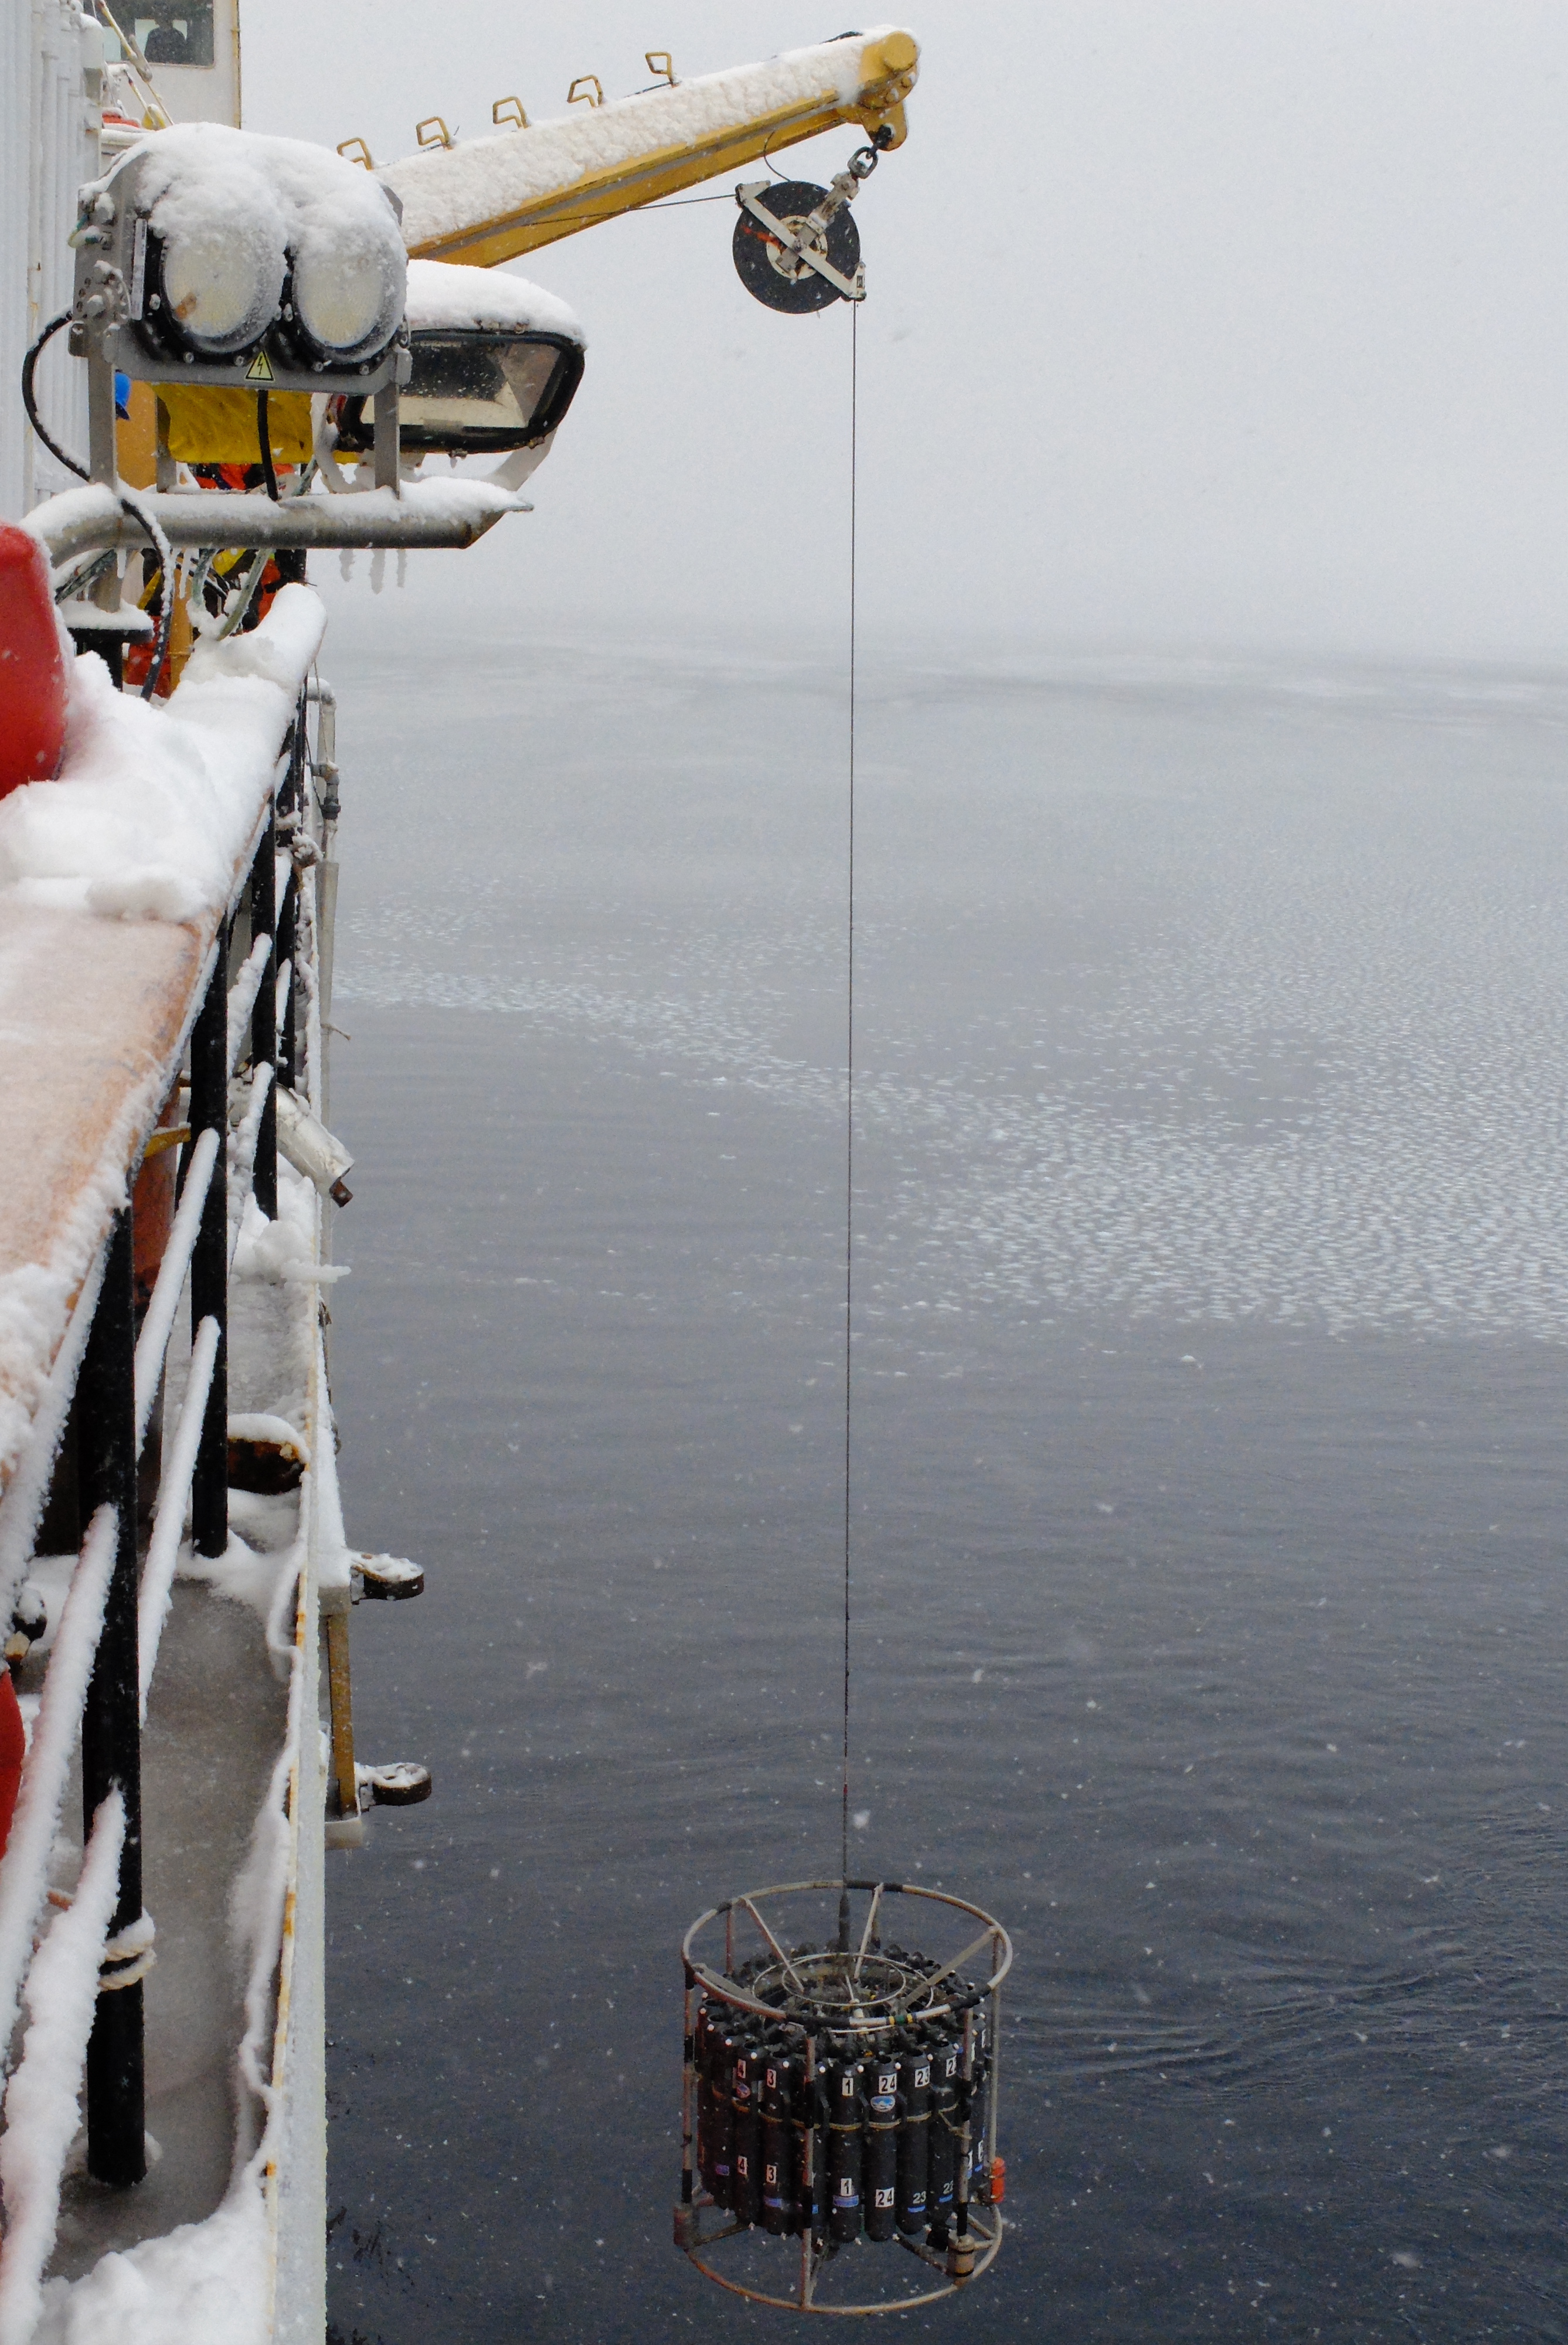 water sampling equipment suspended over the icy water from the ship